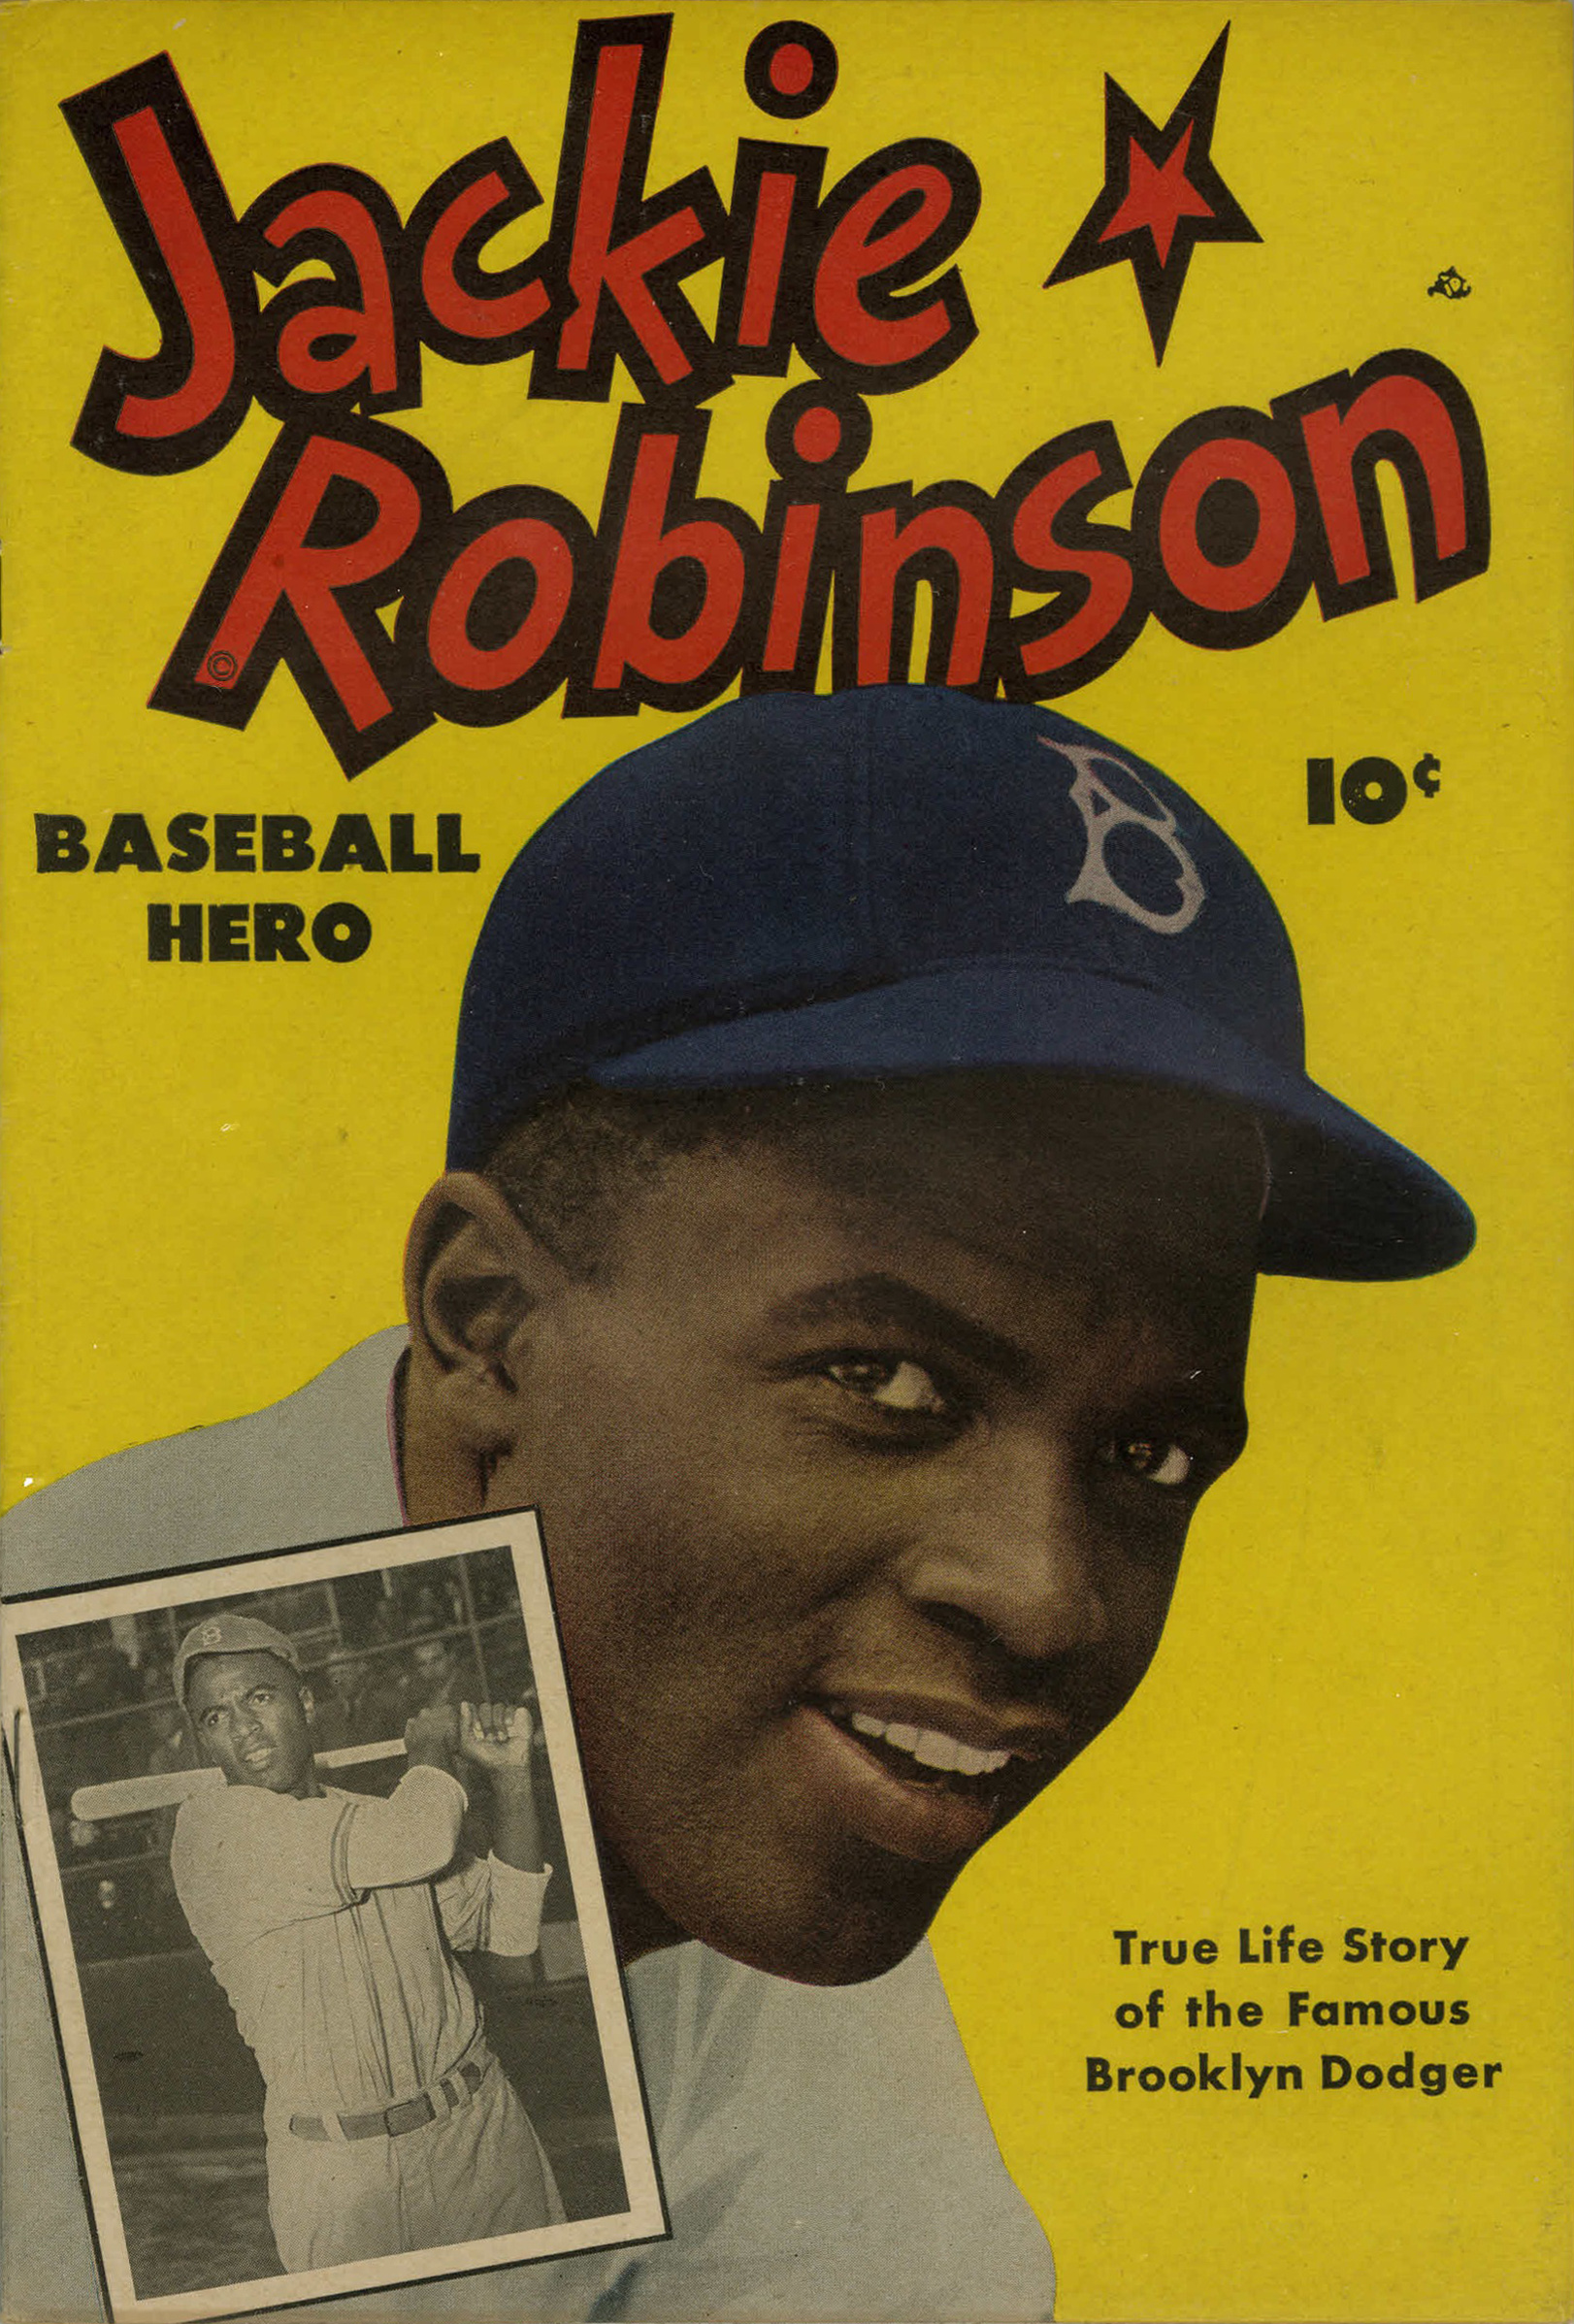 Read online Jackie Robinson comic -  Issue #1 - 2